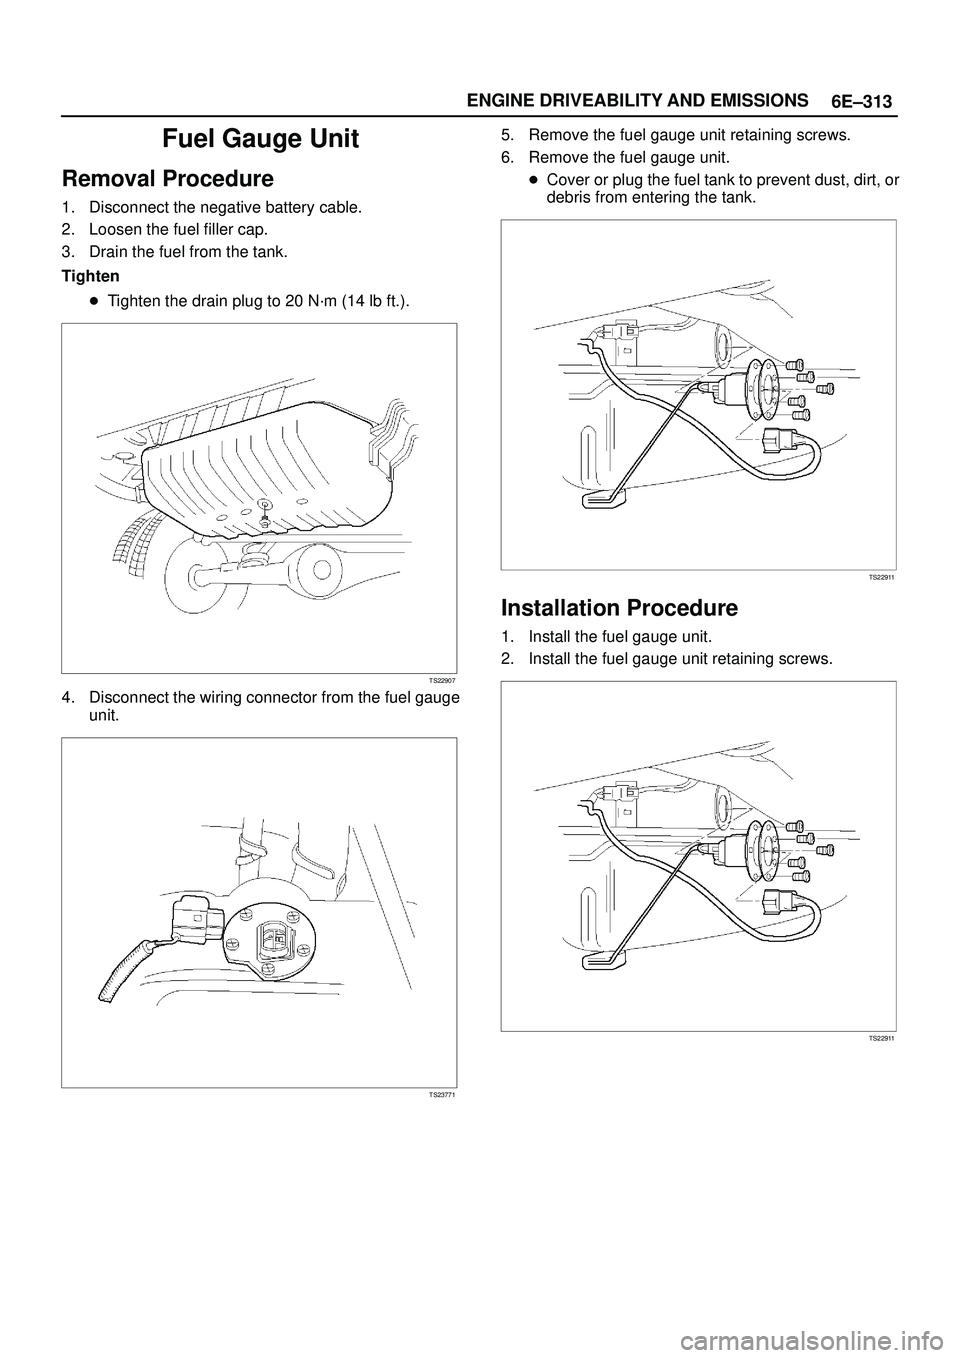 ISUZU TROOPER 1998  Service Repair Manual 6E±313 ENGINE DRIVEABILITY AND EMISSIONS
Fuel Gauge Unit
Removal Procedure
1. Disconnect the negative battery cable.
2. Loosen the fuel filler cap.
3. Drain the fuel from the tank.
Tighten
Tighten t